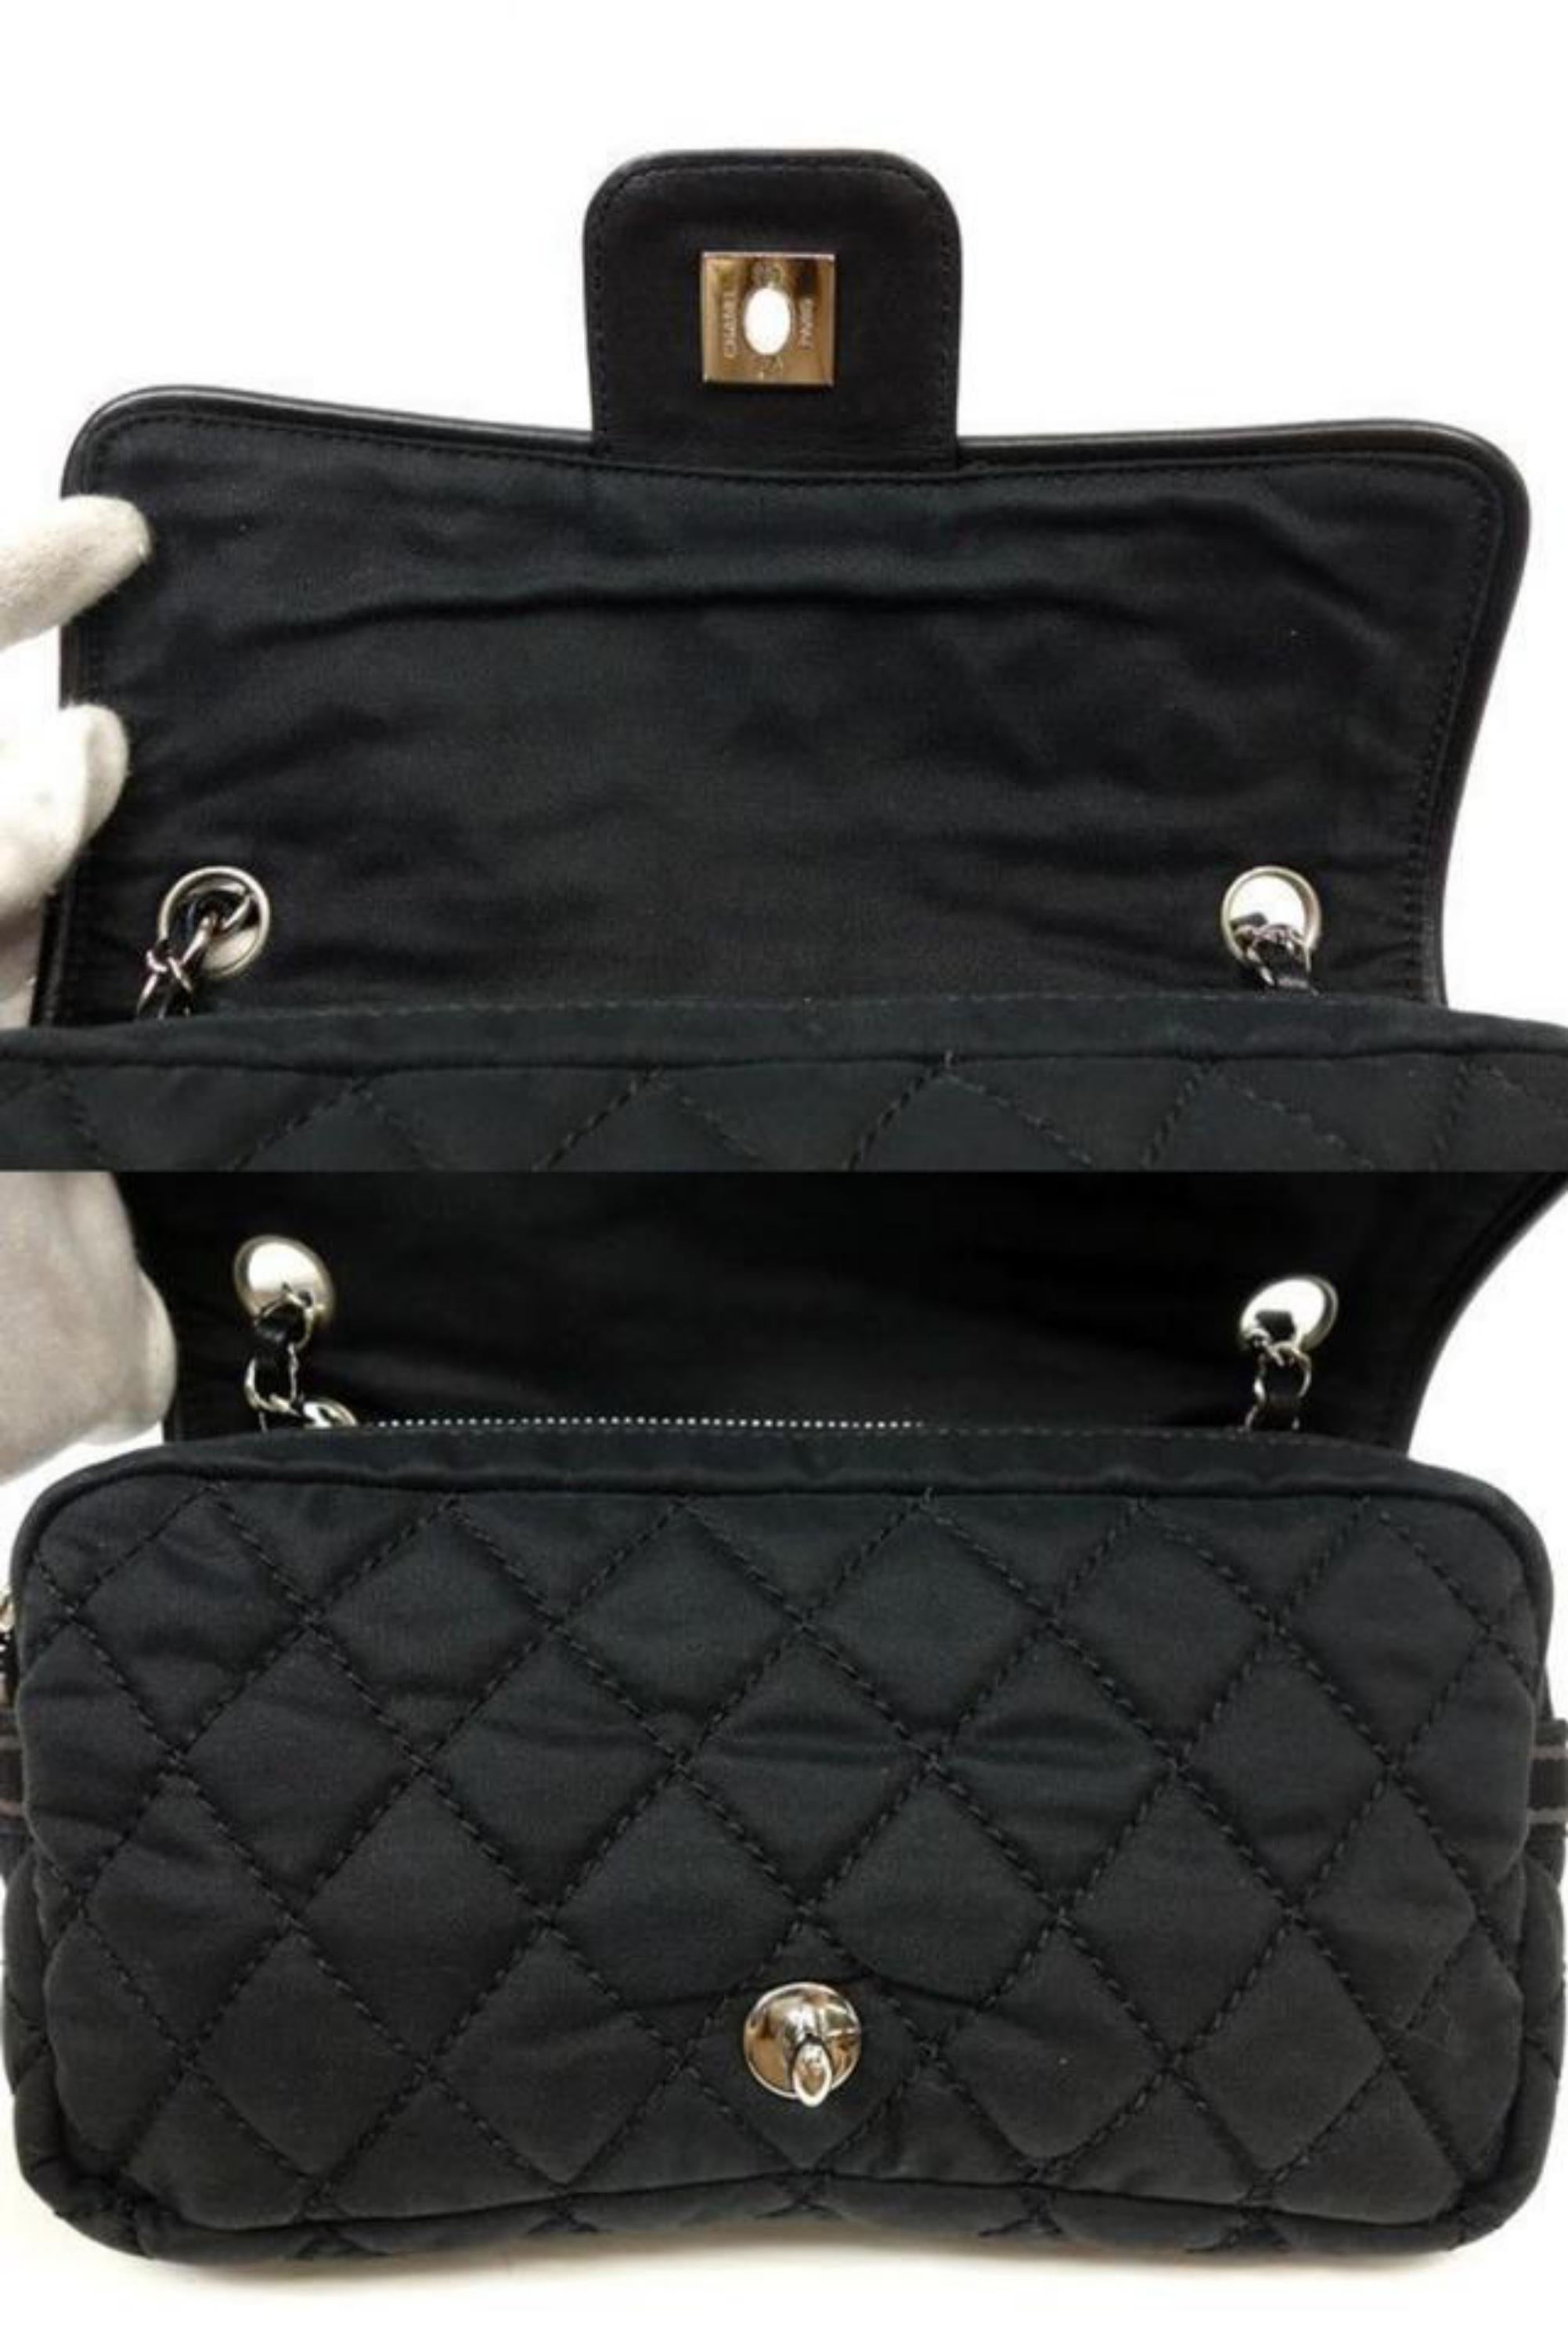 Chanel Flap Chain 227768 Black Pony Hair Shoulder Bag In Good Condition For Sale In Forest Hills, NY